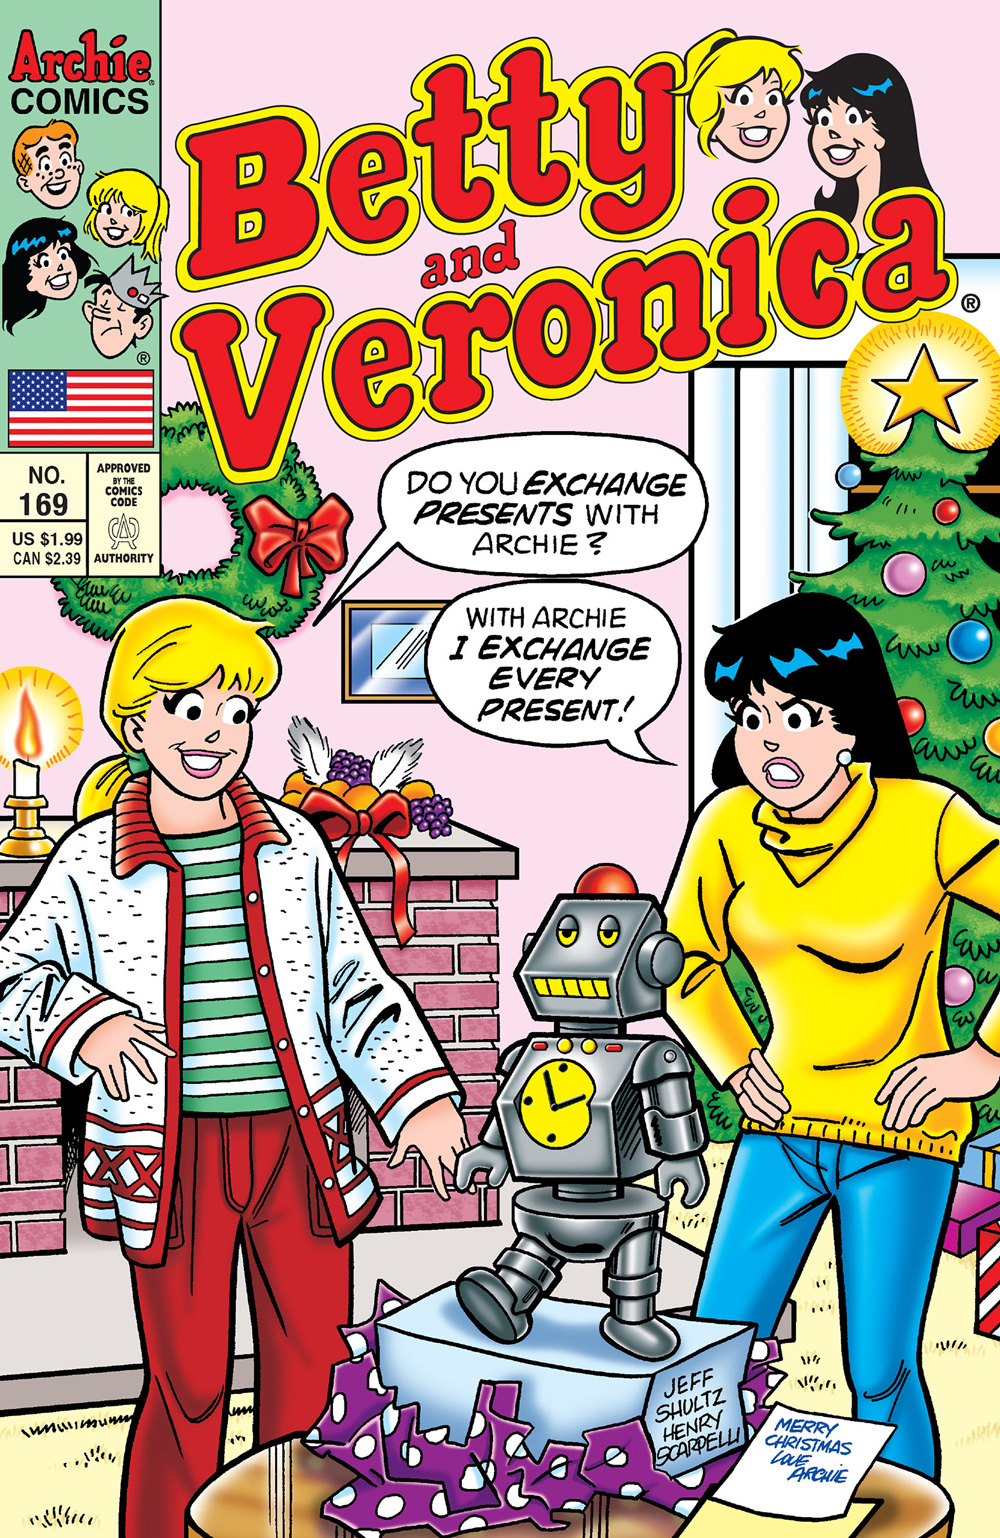 Betty and Veronica stand next to a Christmas tree, looking down at a toy robot. Betty asks Veronica if she exchanges gifts with Archie. Veronica says she exchanges every one of Archie's presents.